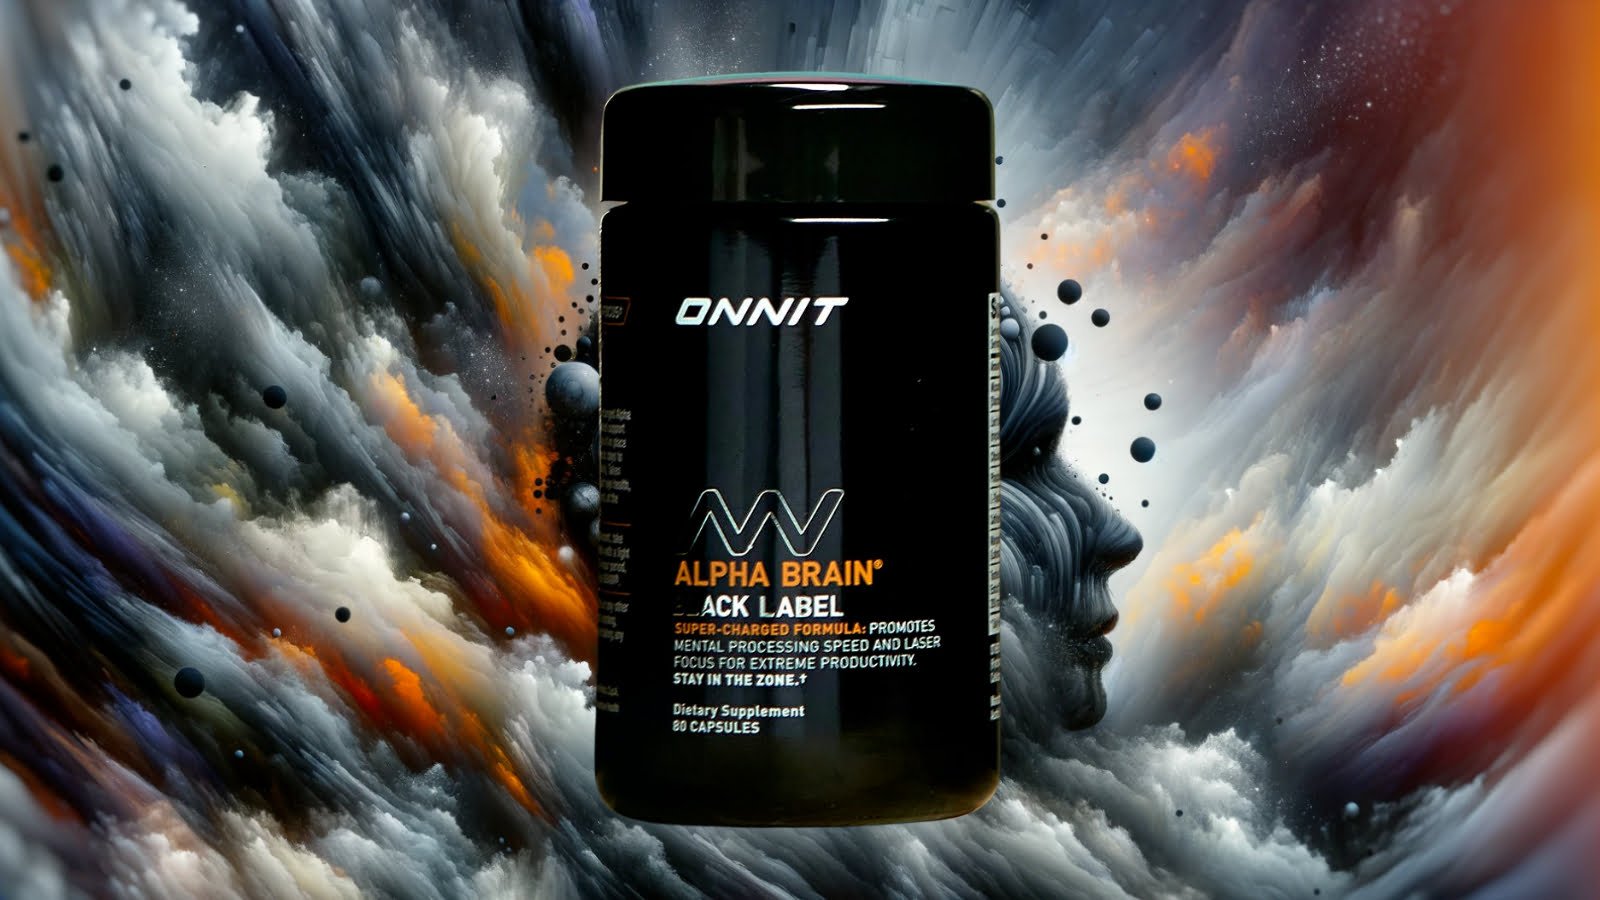 A comprehensive review of Onnit supplements' impact on health and wellness.